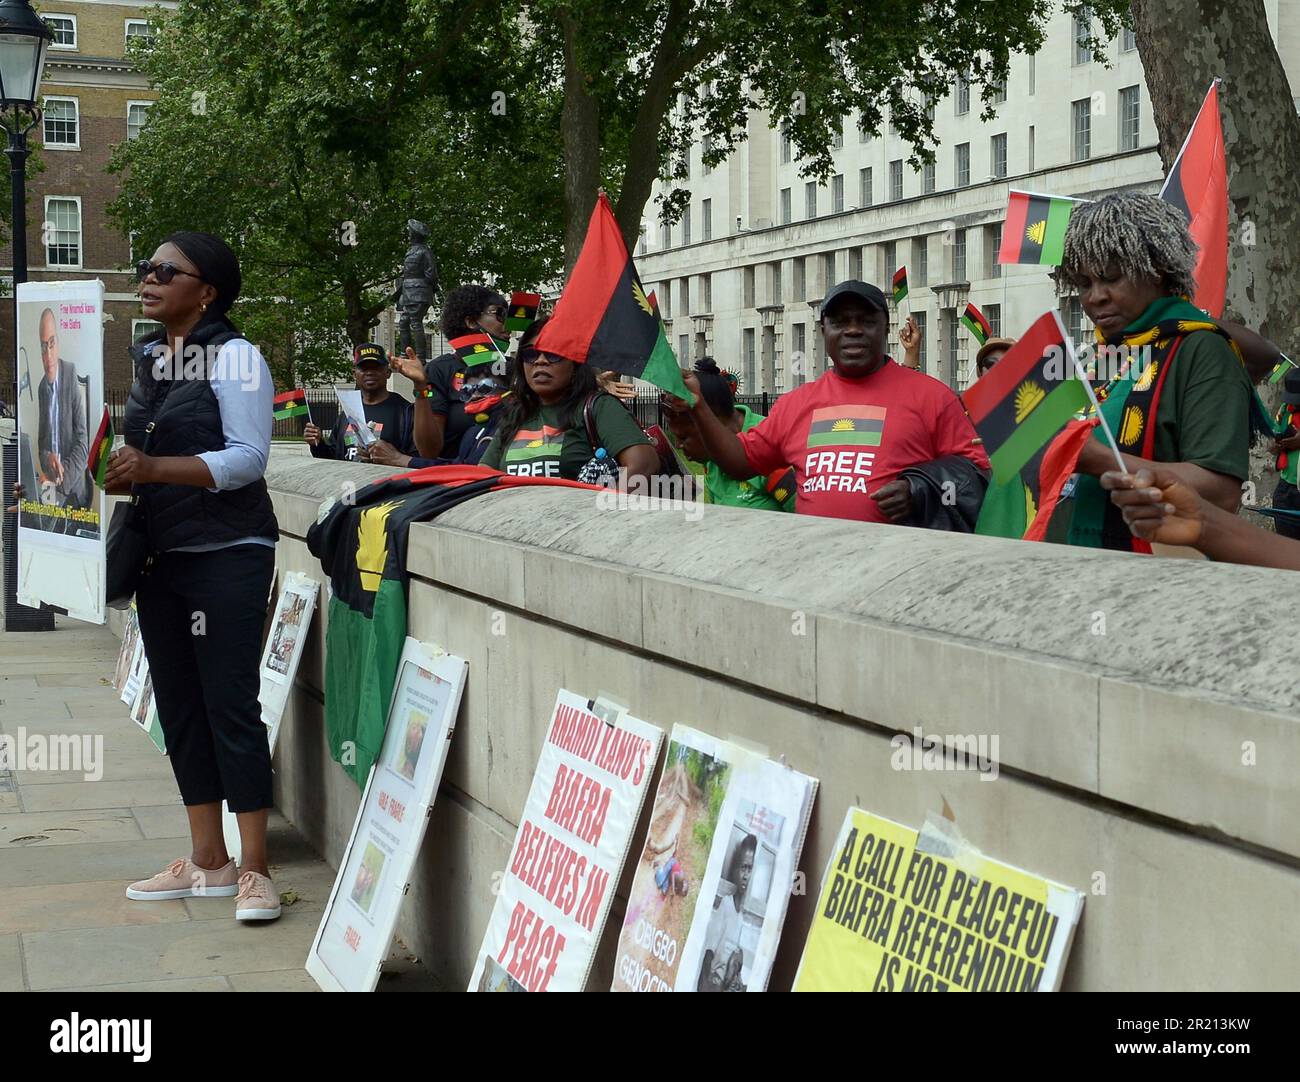 Protest in London for Nnamdi Okwu Kanu a Nigerian pro-Biafra political activist, who is also a British citizen. He is the leader of the Indigenous People of Biafra (IPOB). Kanu founded IPOB in 2014. The main aim of IPOB is to restore the separatist state of Biafra which existed in Nigeria's Eastern Region during the Nigerian Civil War of 1967-1970. Stock Photo